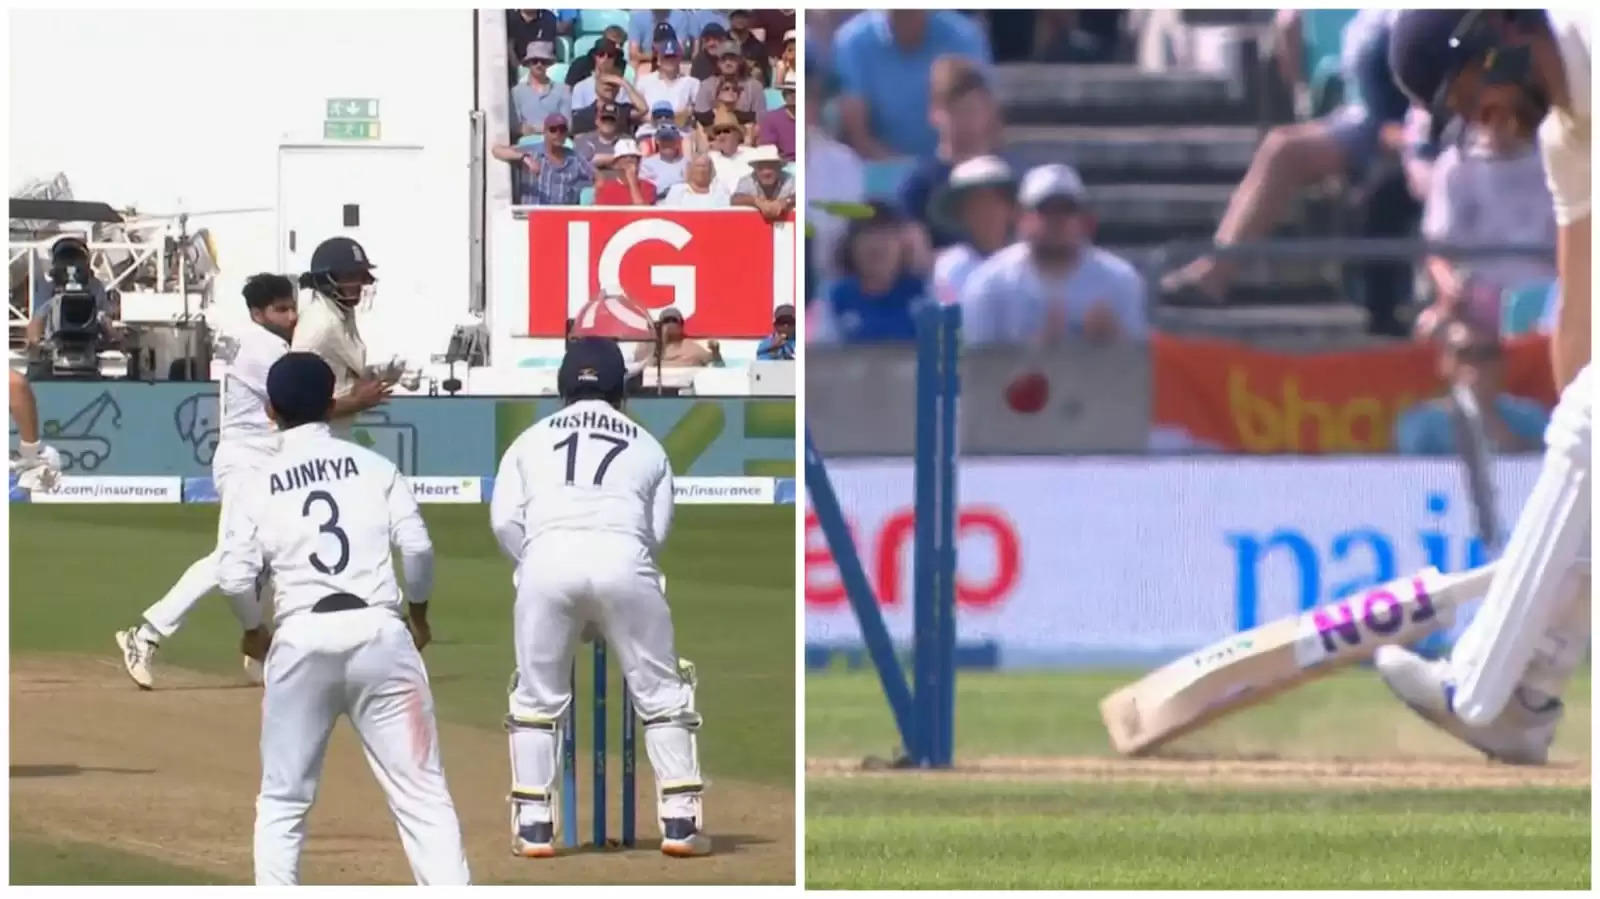 ALMOST A CONTROVERSY: Jadeja tackles Hameed down, Malan returns in time as India effect direct hit